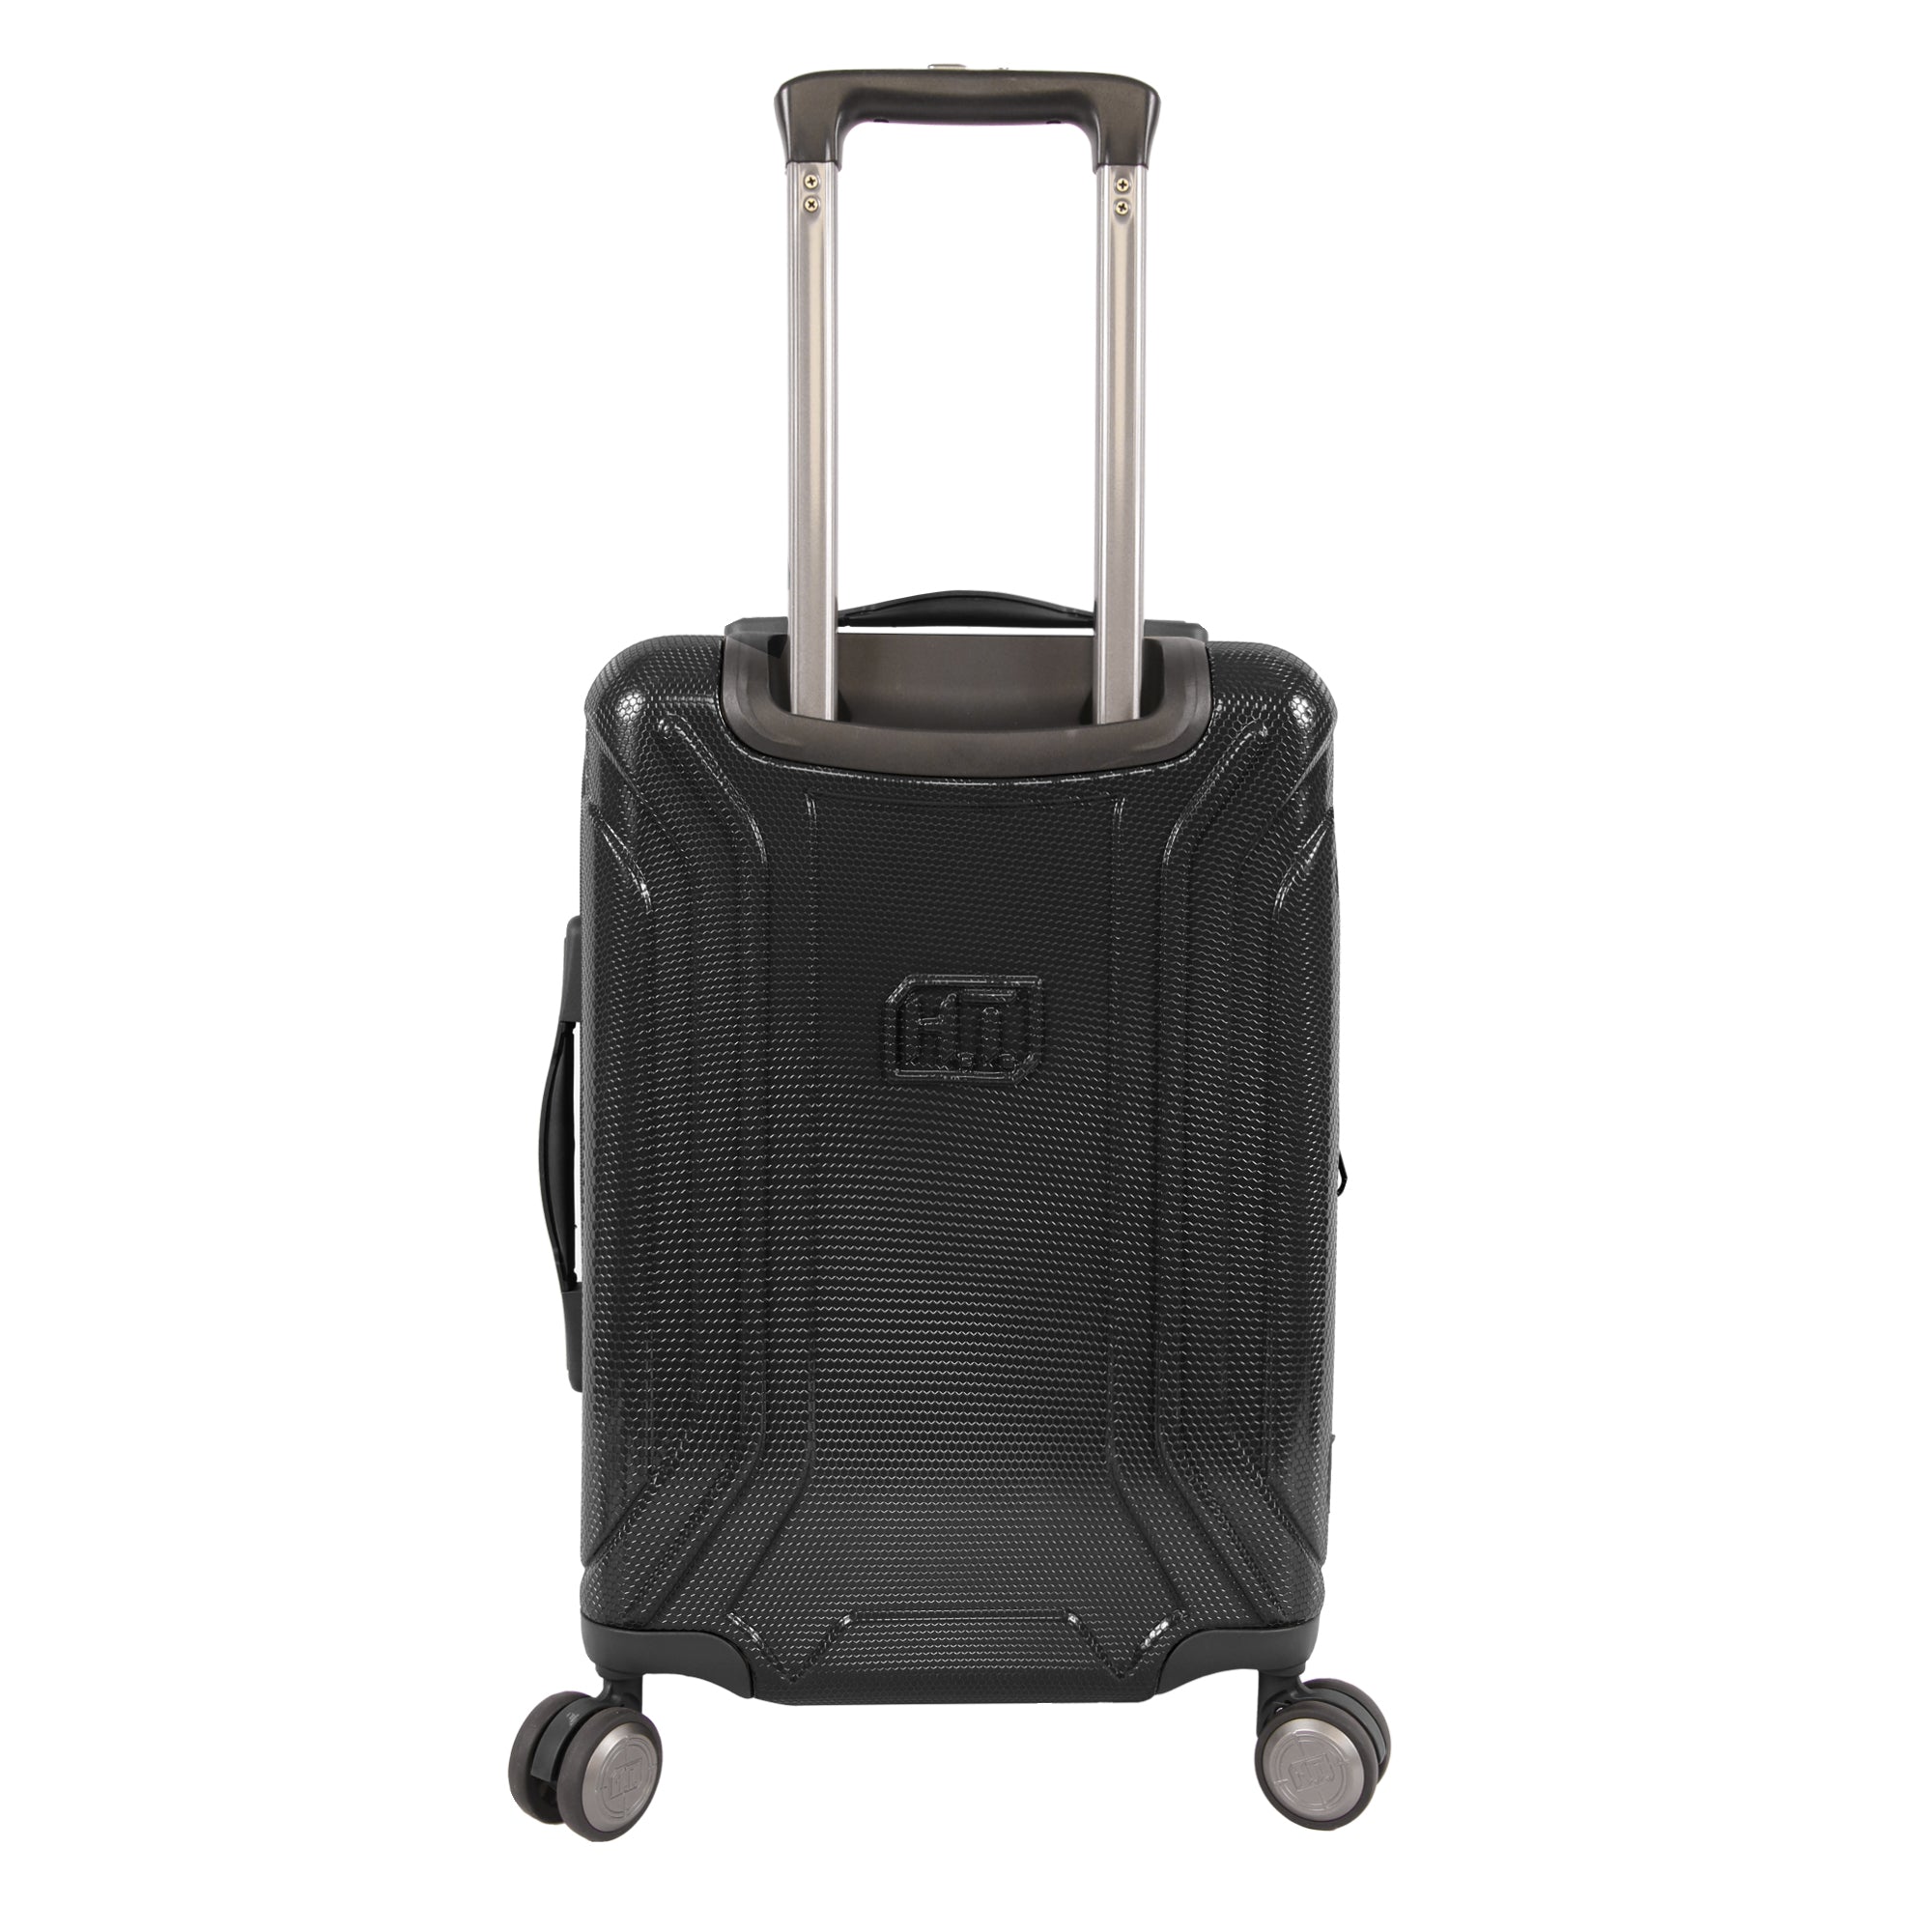 Armor Luggage 21" Carry-on Luggage